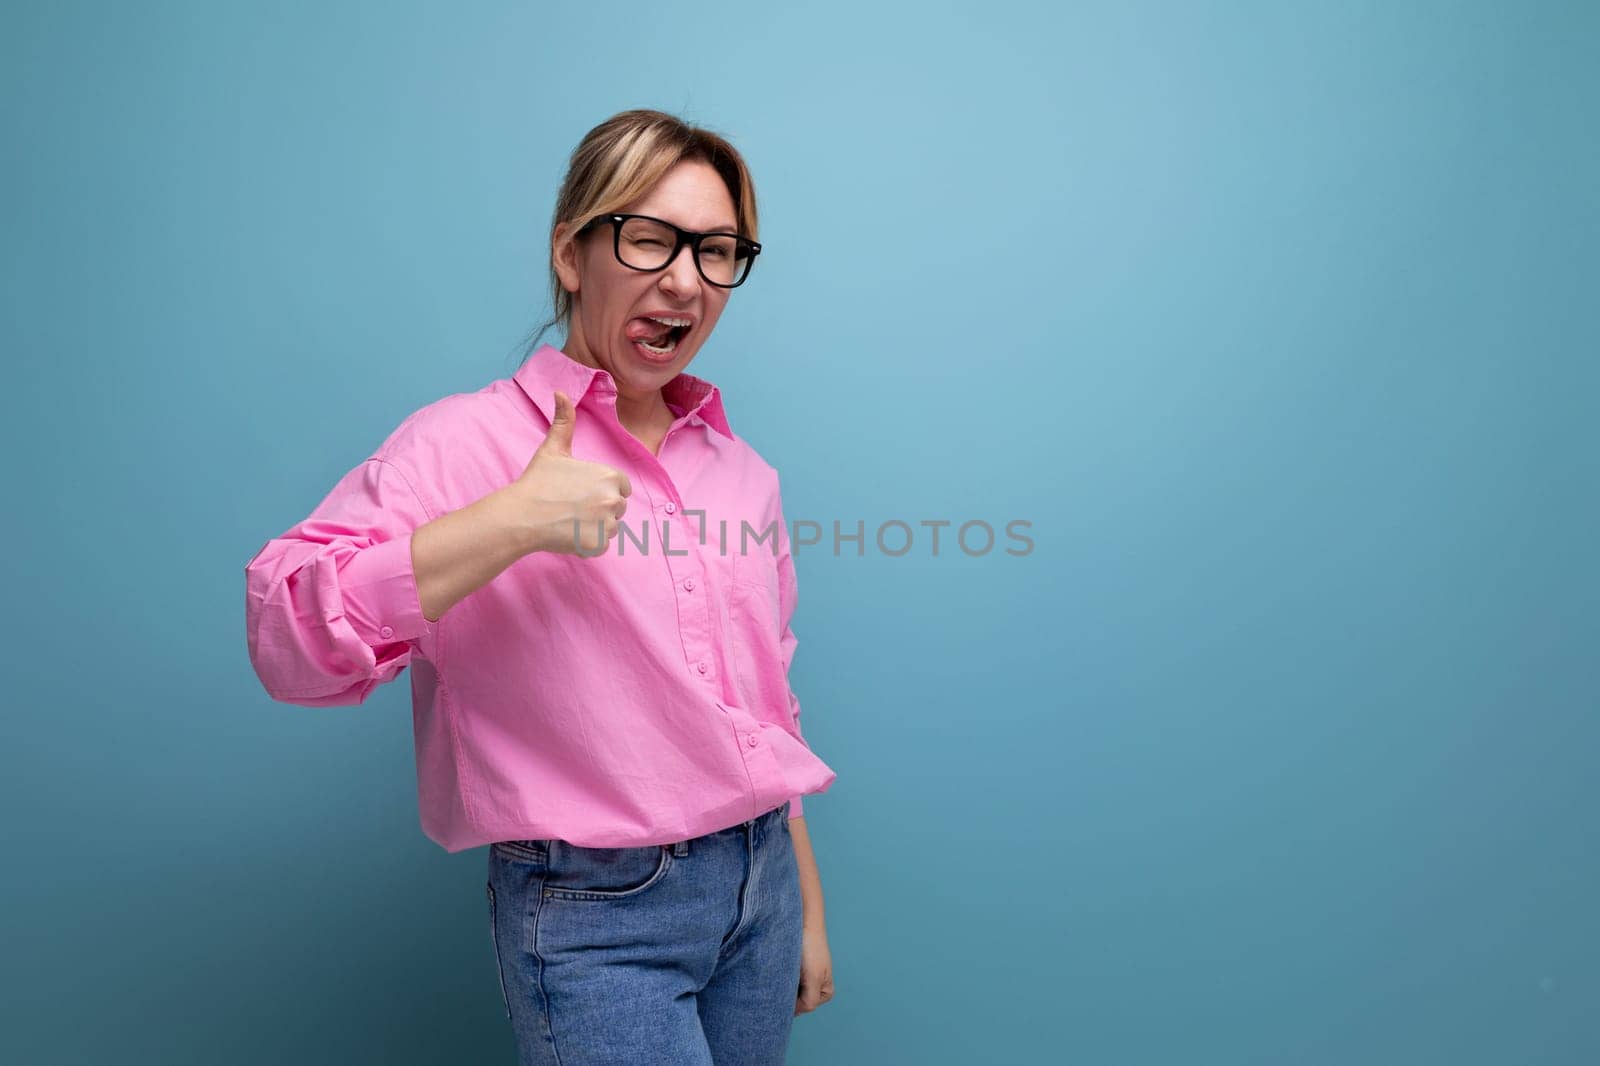 confident positive young blond caucasian woman model with ponytail hairstyle in a stylish look consisting of a pink blouse and jeans.